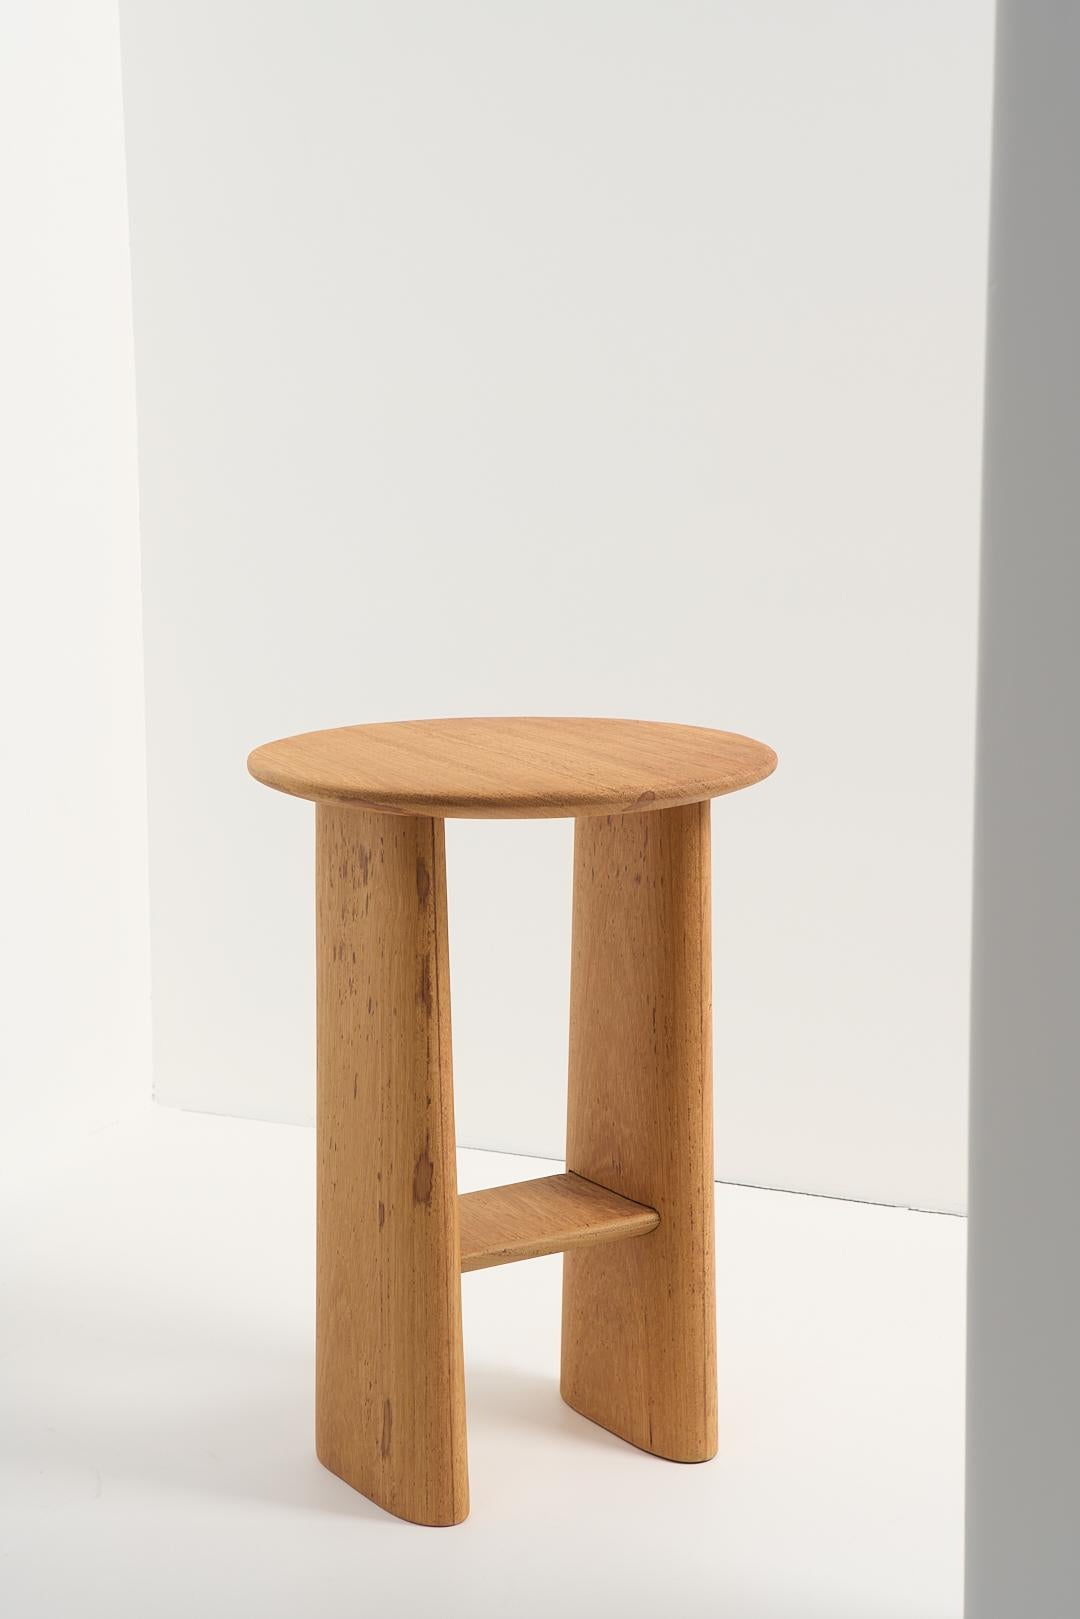 Minimalist Torii Collection, Tall Circular Wooden Side Table For Sale